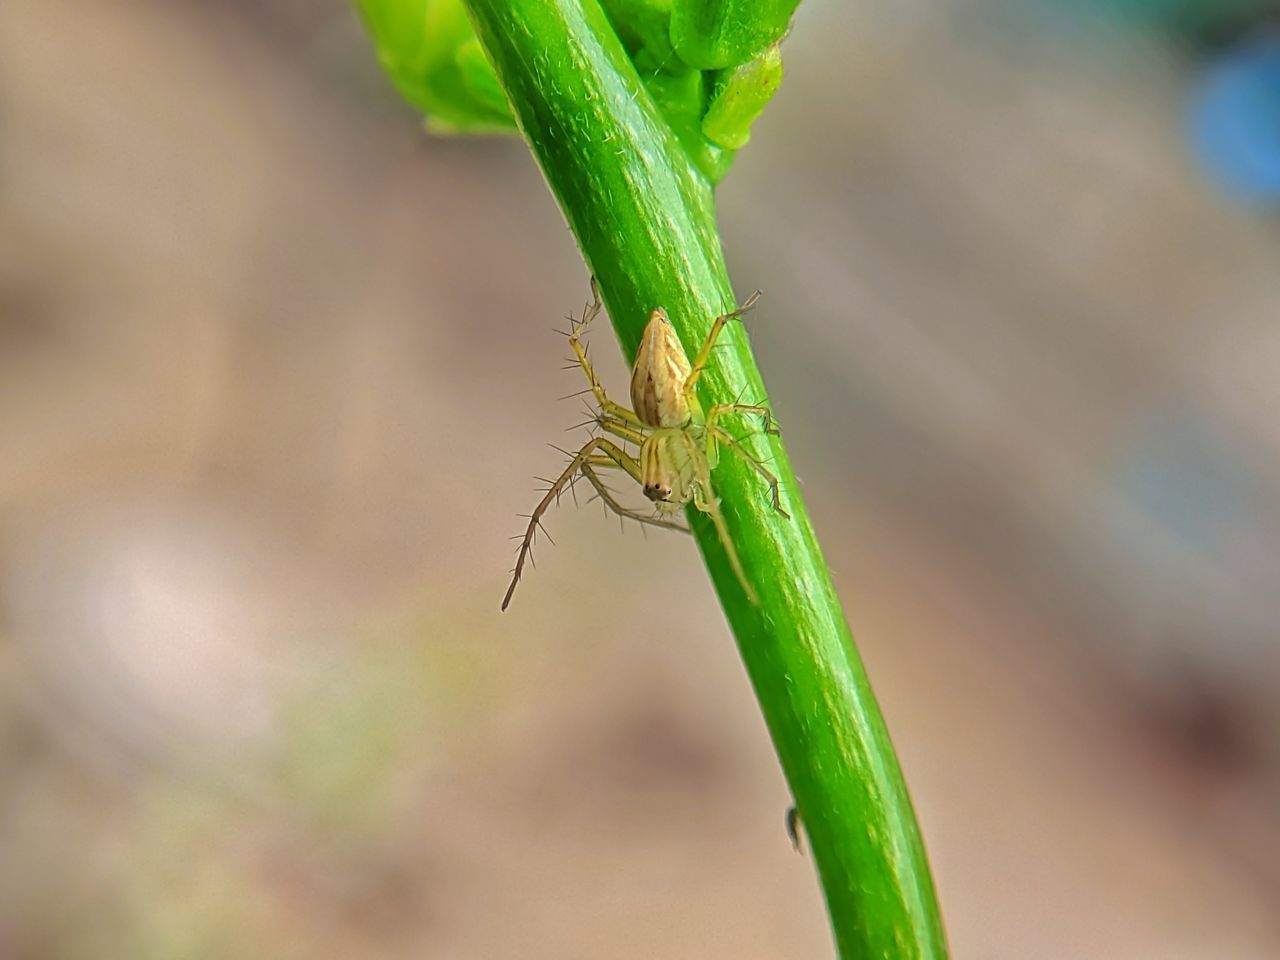 green, animal themes, animal, animal wildlife, insect, one animal, wildlife, close-up, nature, macro photography, plant stem, plant, focus on foreground, no people, macro, animal body part, outdoors, grass, plant part, leaf, day, flower, environment, beauty in nature, food